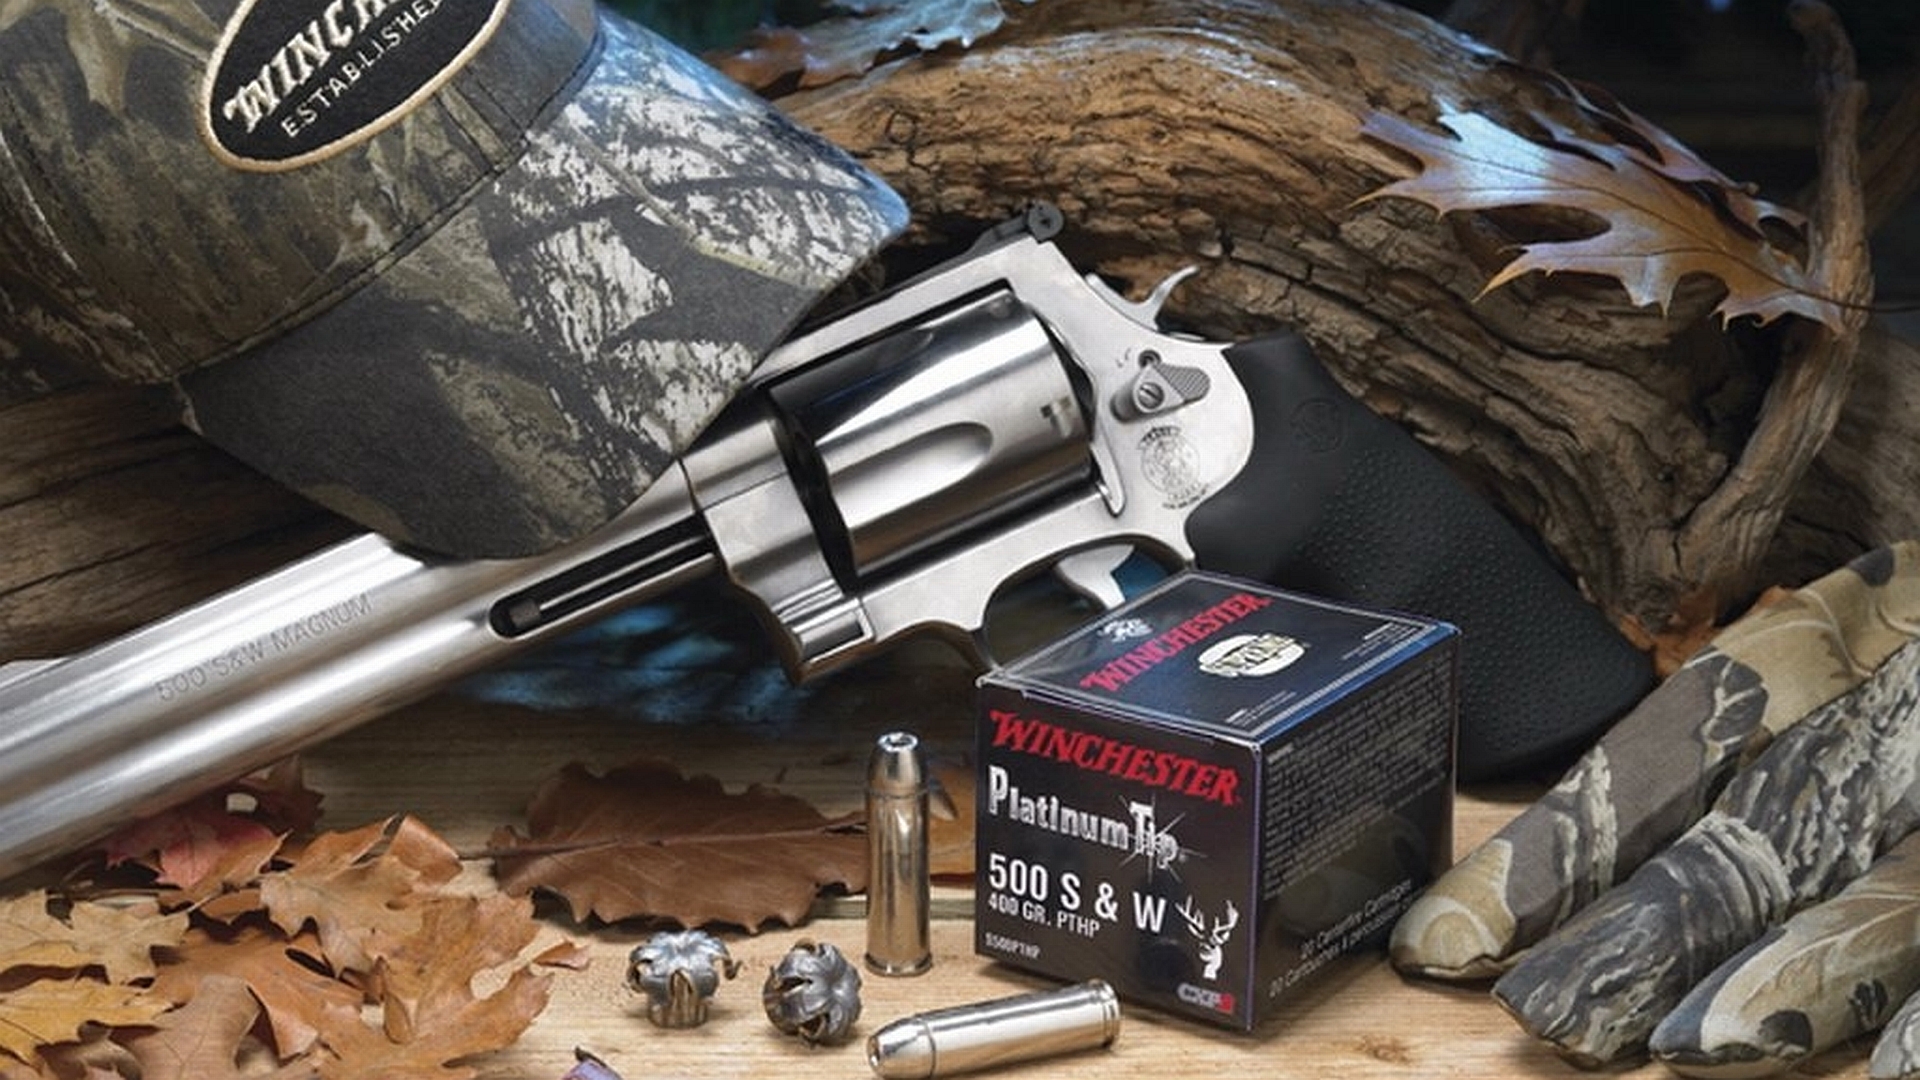 Weapons Smith Amp Wesson 500 Magnum Revolver 1920x1080